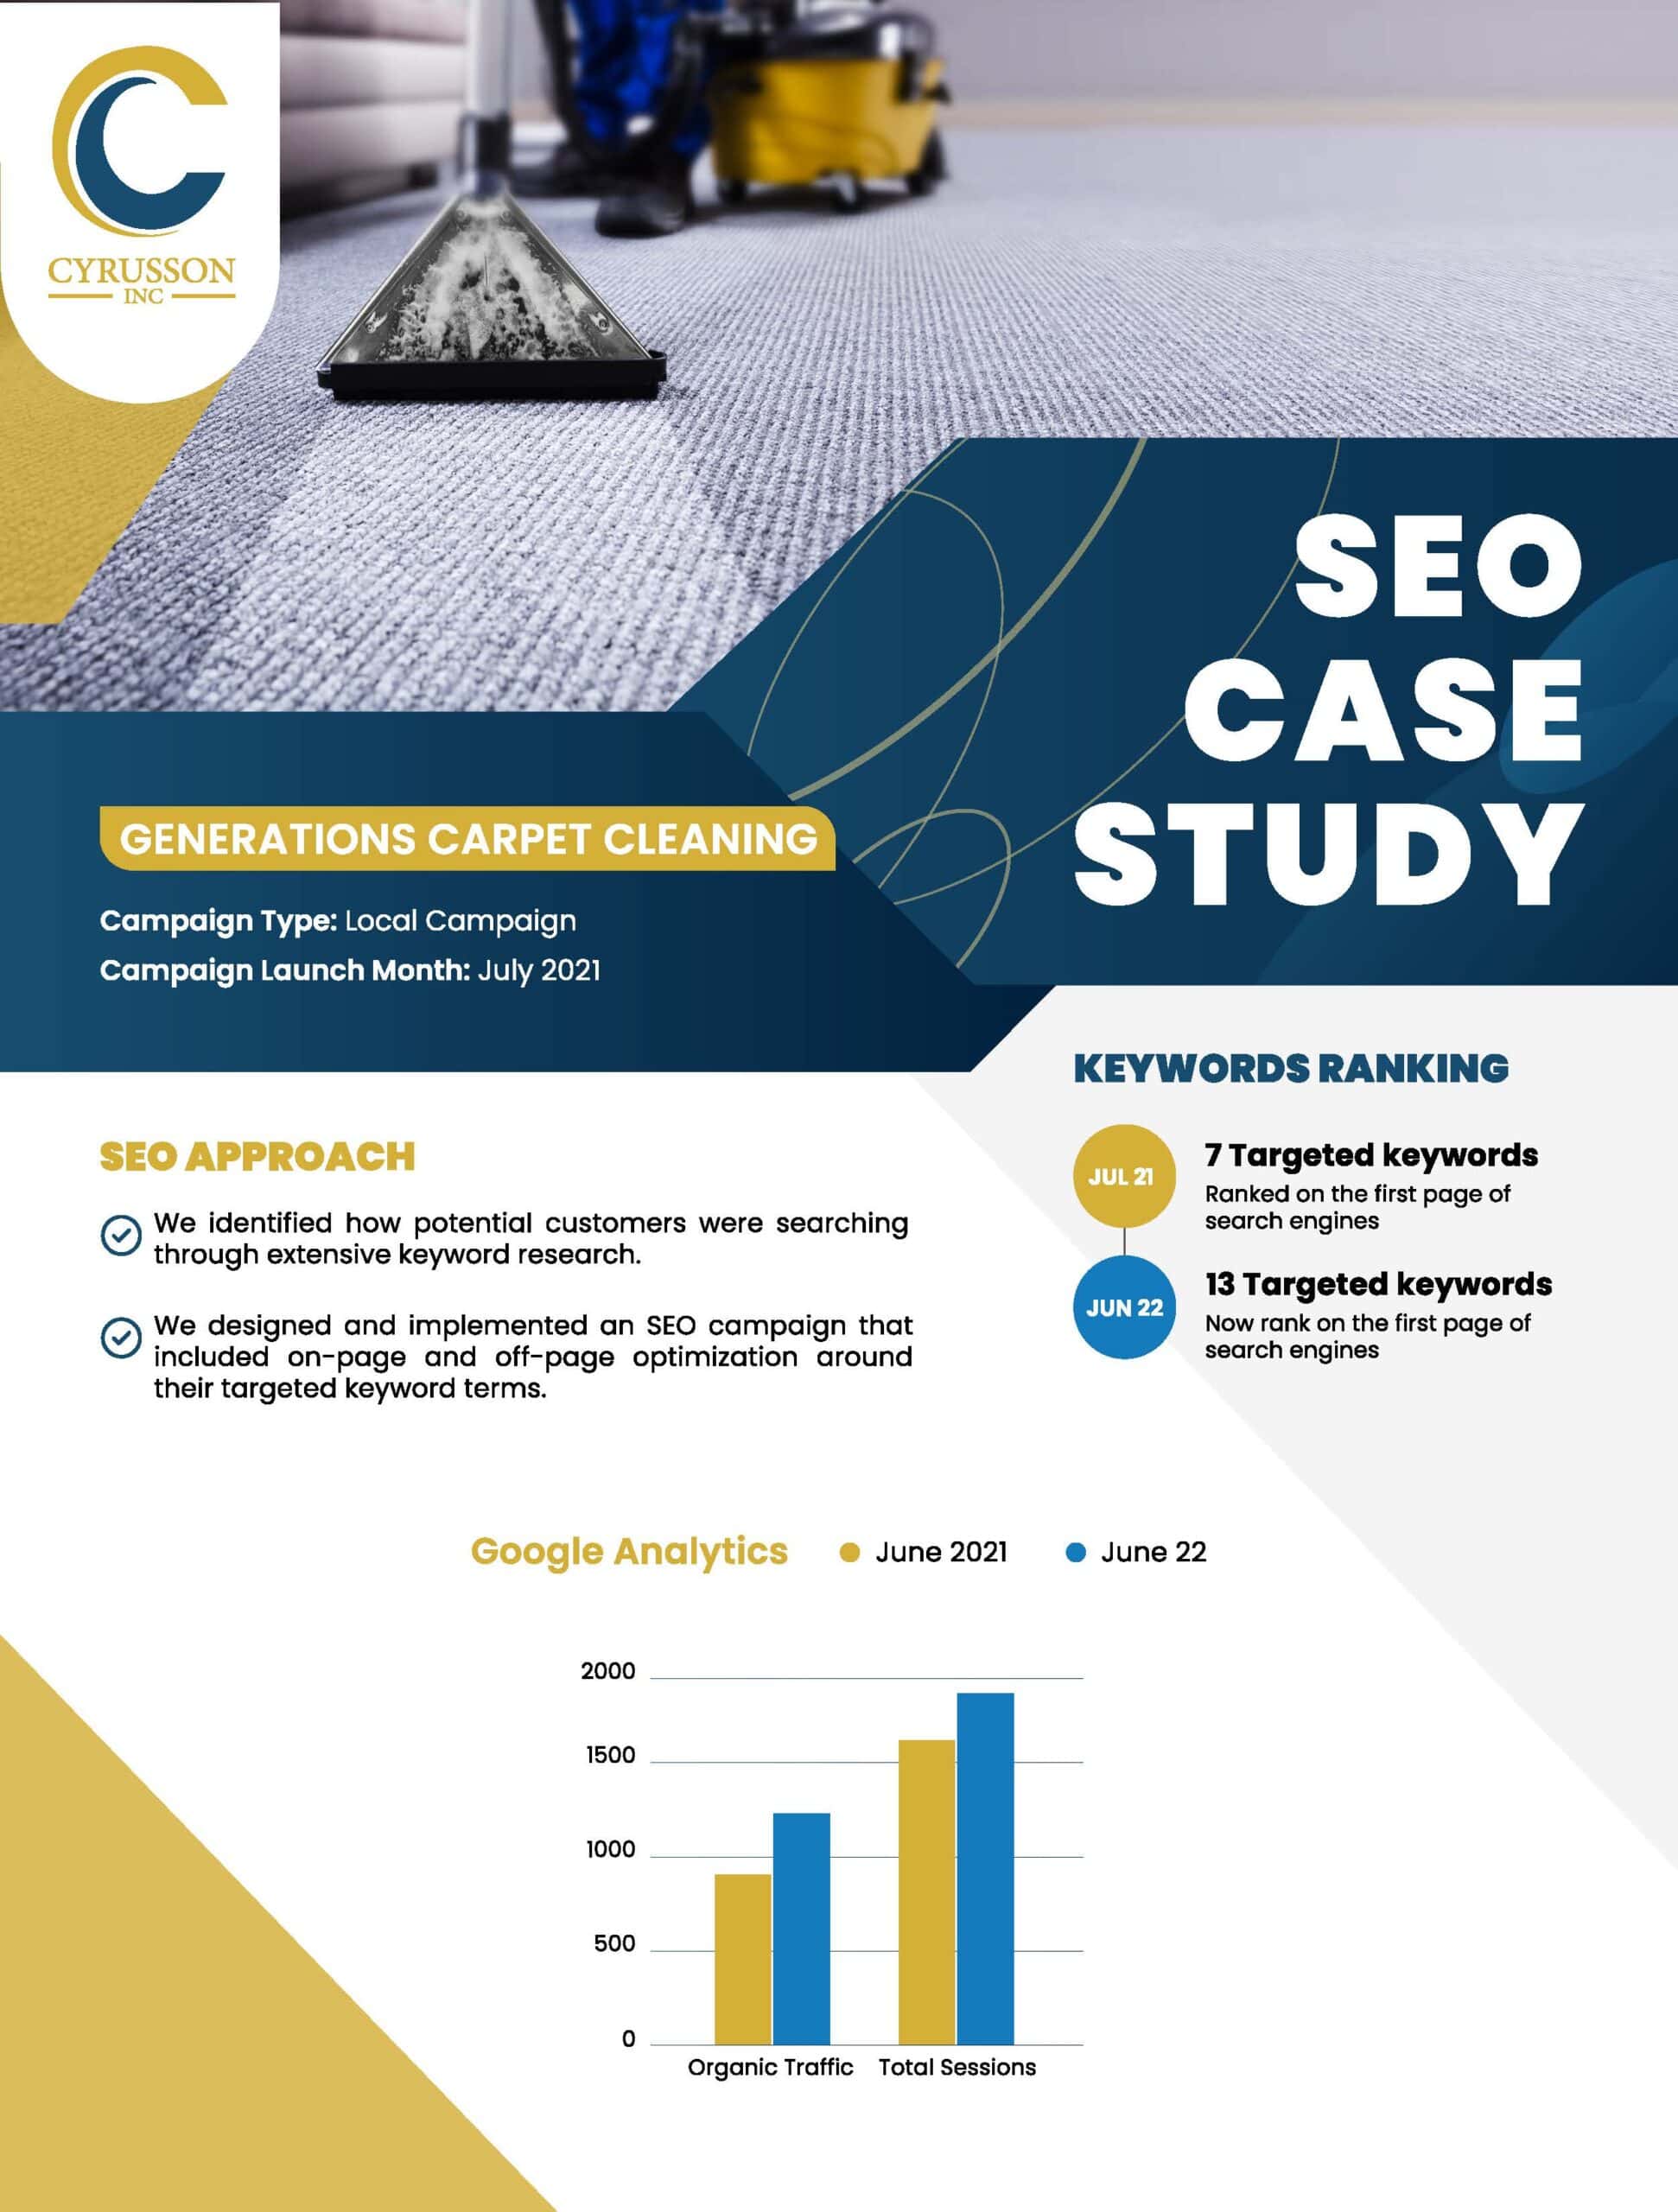 SEO Case Study - Carpet Cleaning Services | Cyrusson